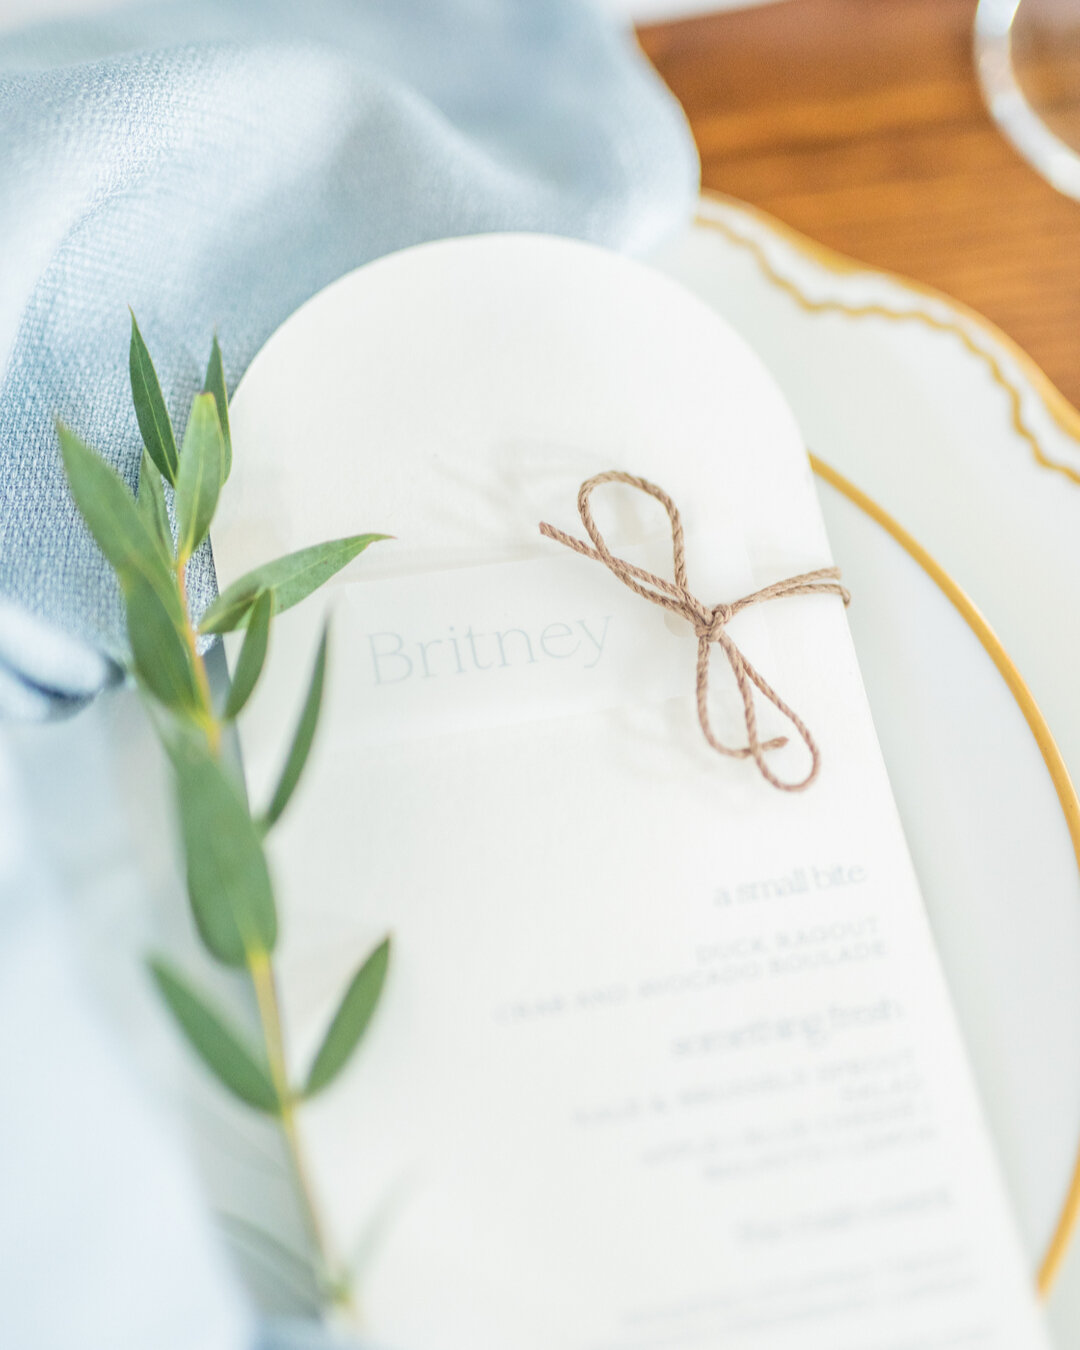 Arches are a classic if you ask me. Would you agree?​​​​​​​​
​​​​​​​​
Wedding arches, arches in houses and architecture, arches in design, and arches in your wedding stationery.​​​​​​​​
​​​​​​​​
I loved adding this detail to each place setting as a m